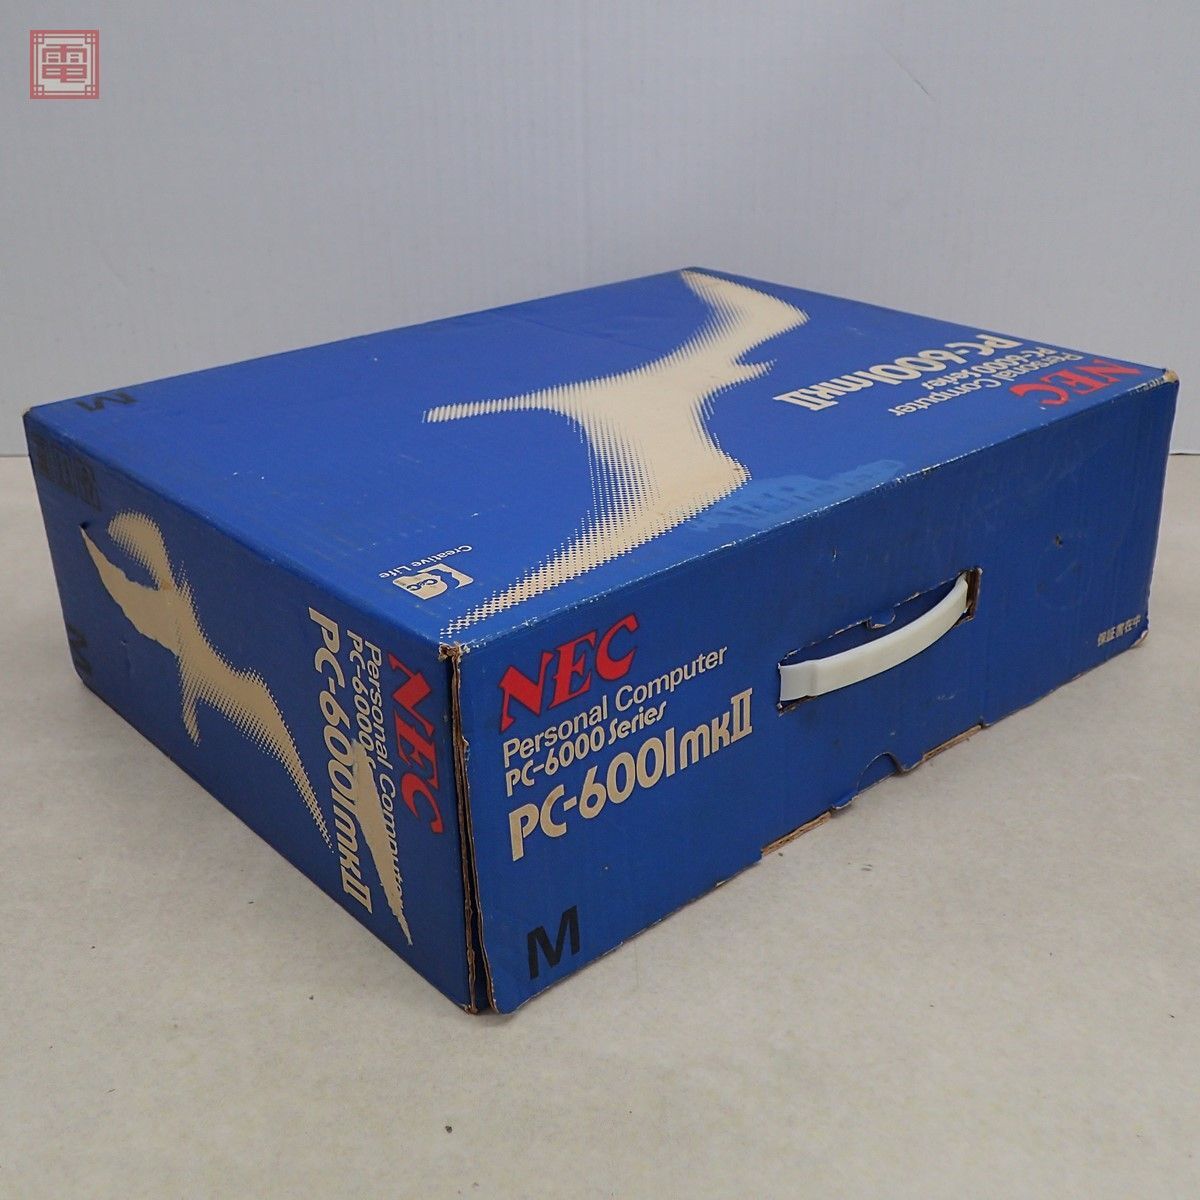 NEC PC-6001mkII body metallic silver box attaching Japan electric operation defect Junk parts taking .. please [40